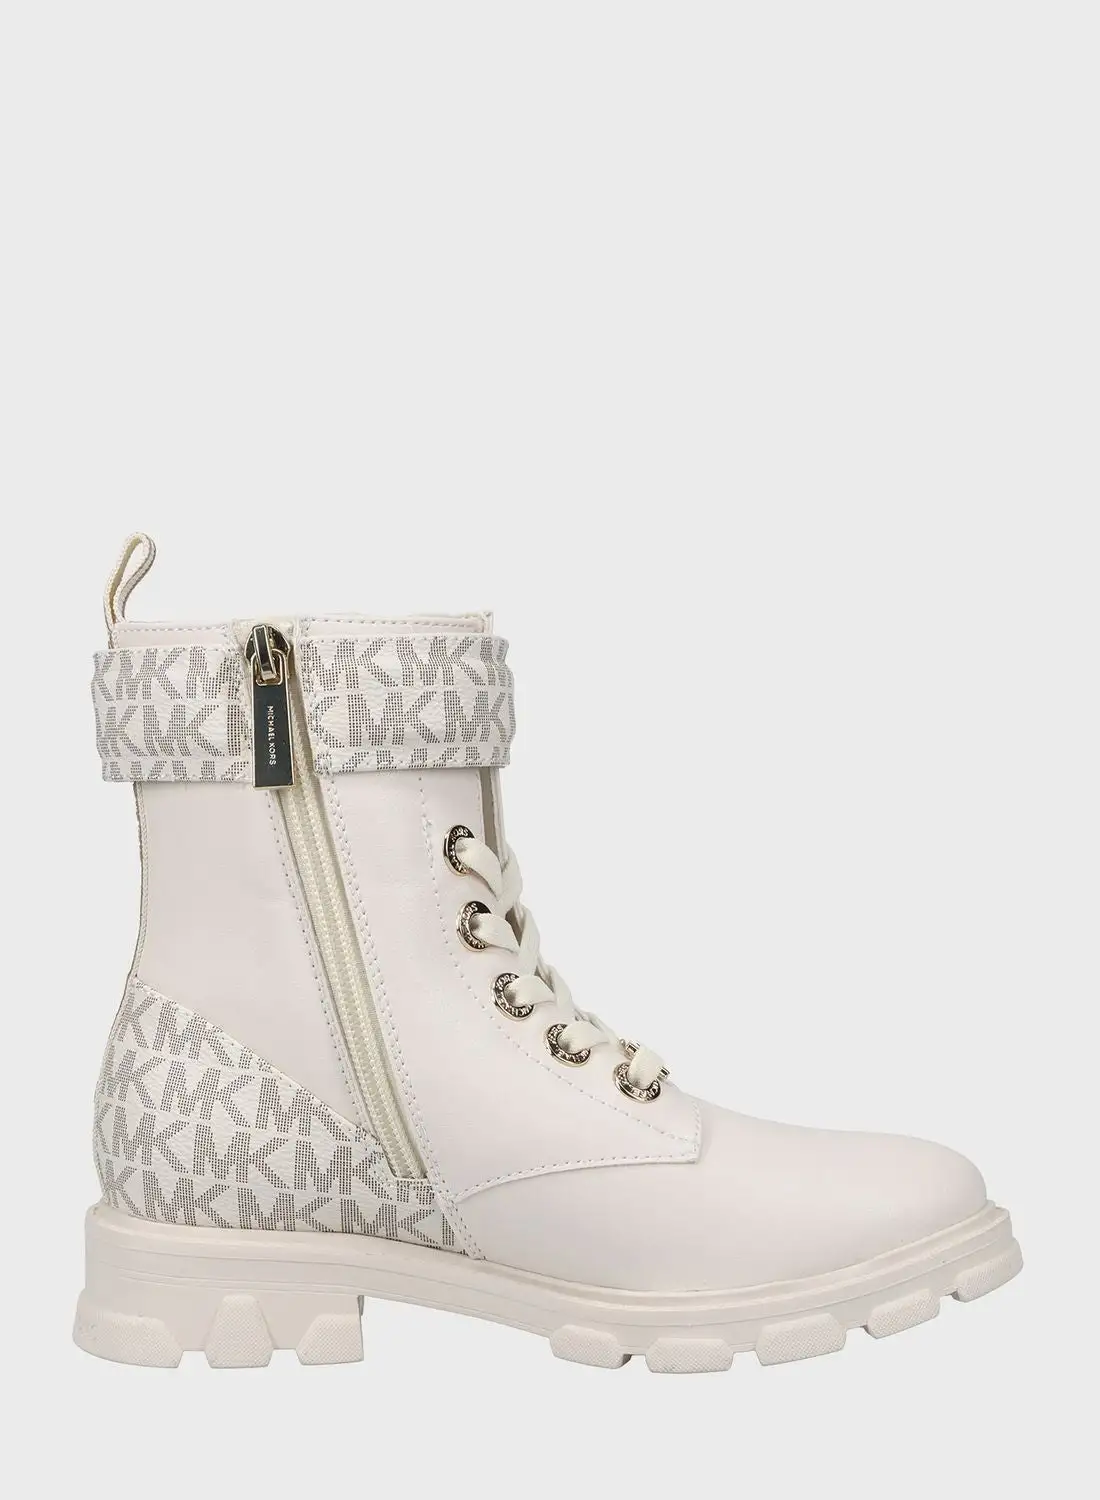 Michael Kors Youth Ridley Chelsea Ankle Boots